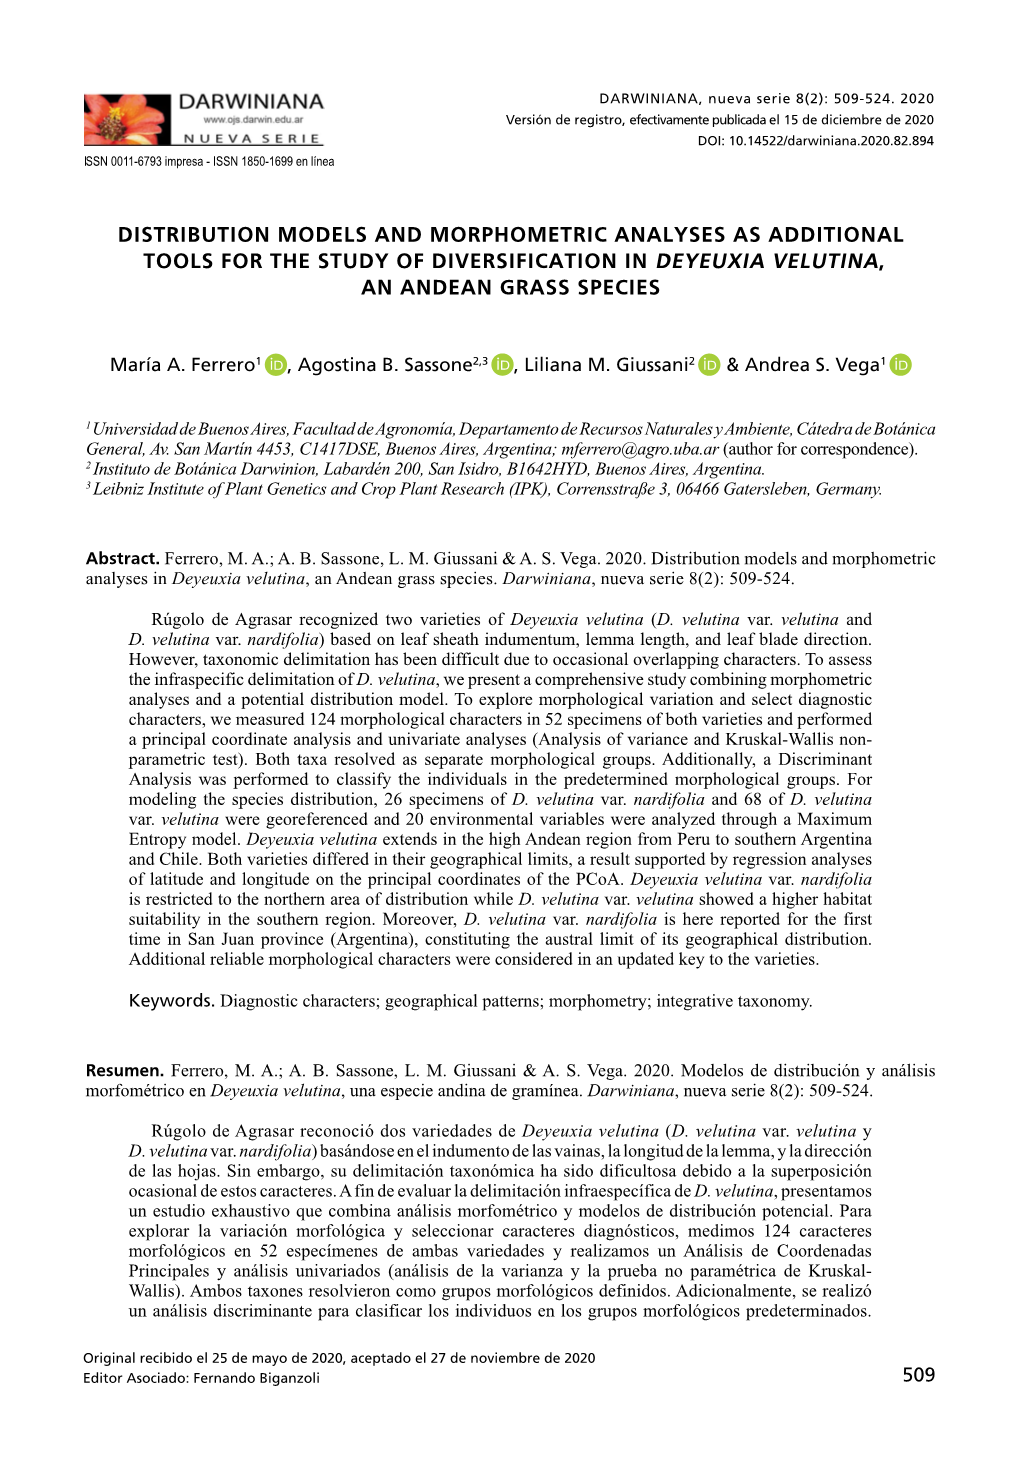 Distribution Models and Morphometric Analyses As Additional Tools for the Study of Diversification in Deyeuxia Velutina, an An